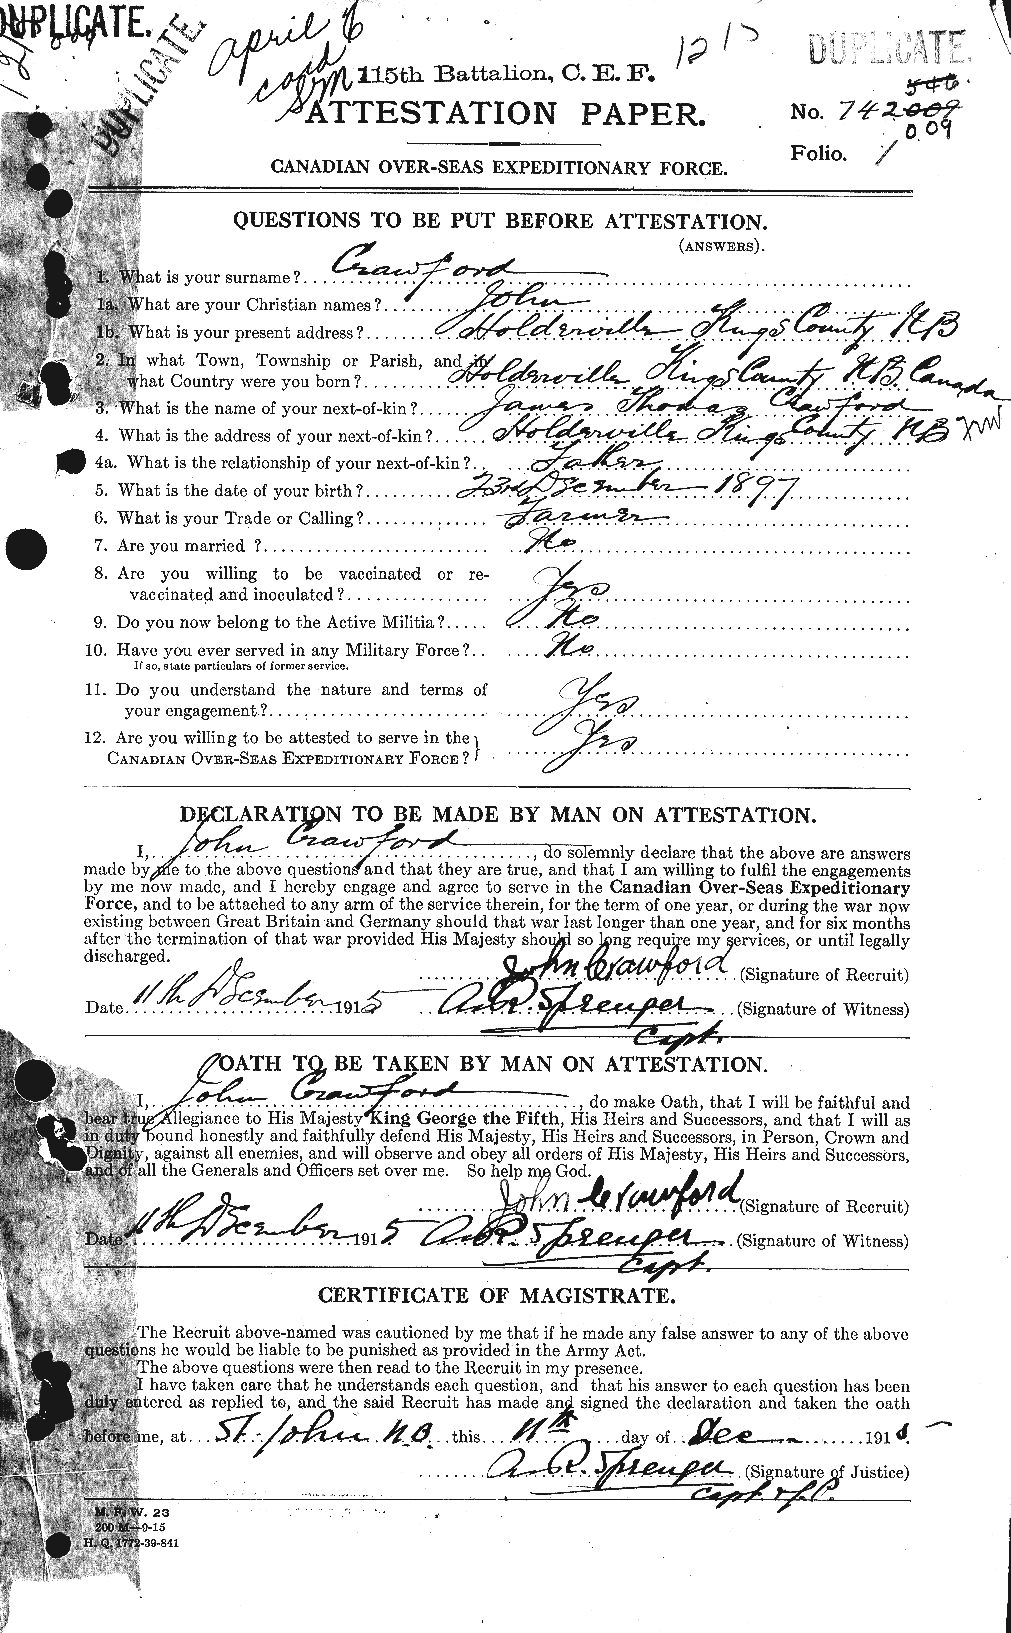 Personnel Records of the First World War - CEF 062440a